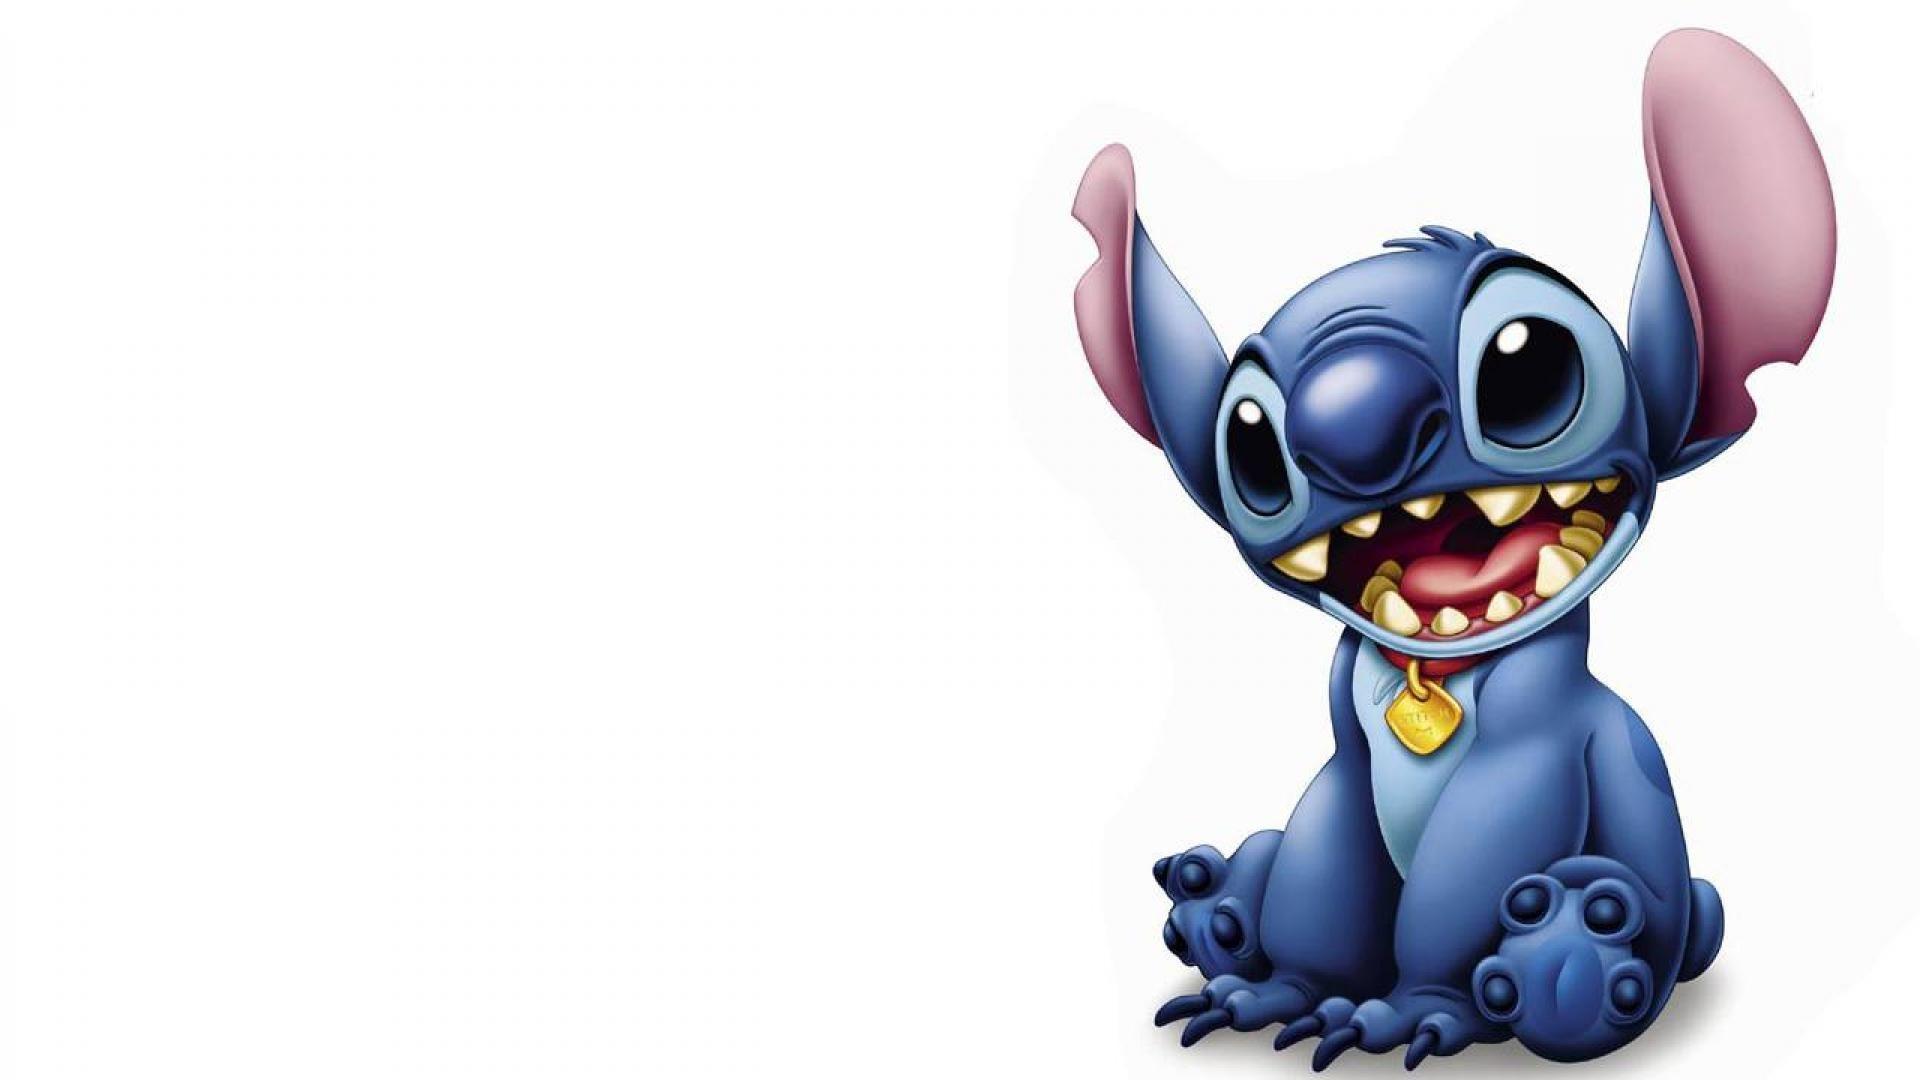 Stitch Wallpapers - Wallpaper Cave